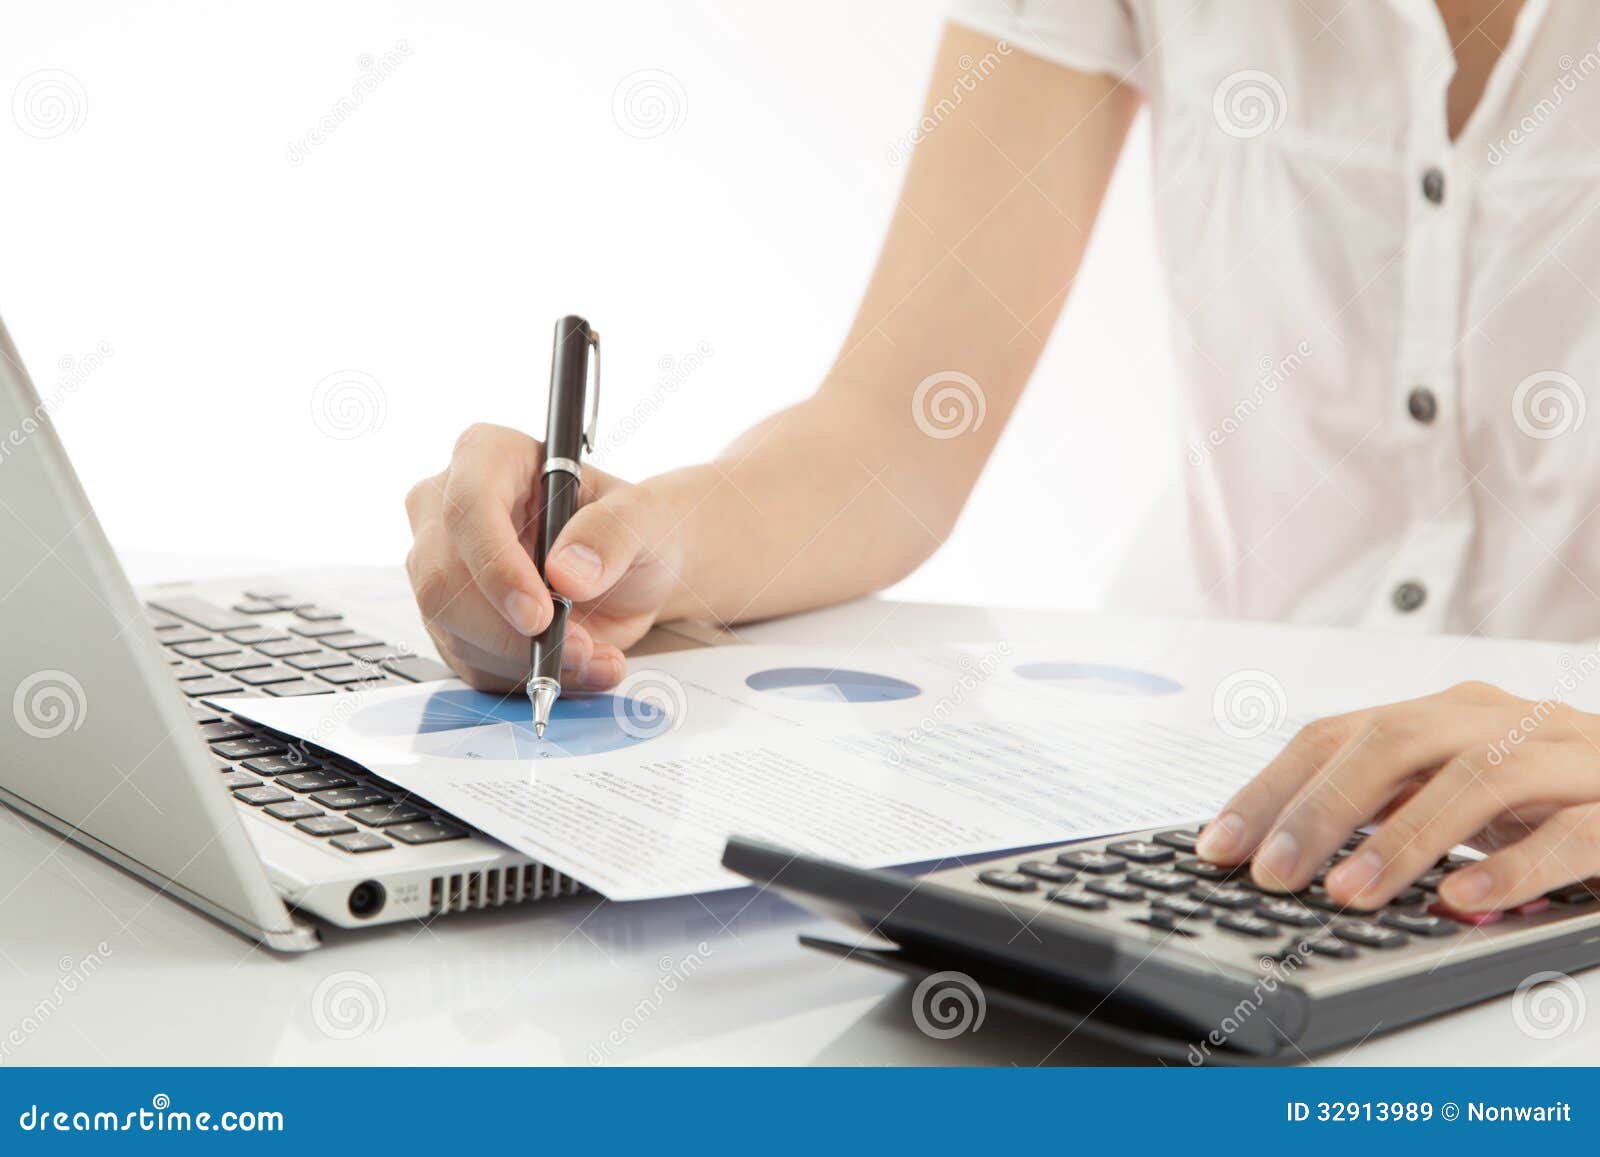 Woman hand on laptop stock image. Image of list, chart - 32913989